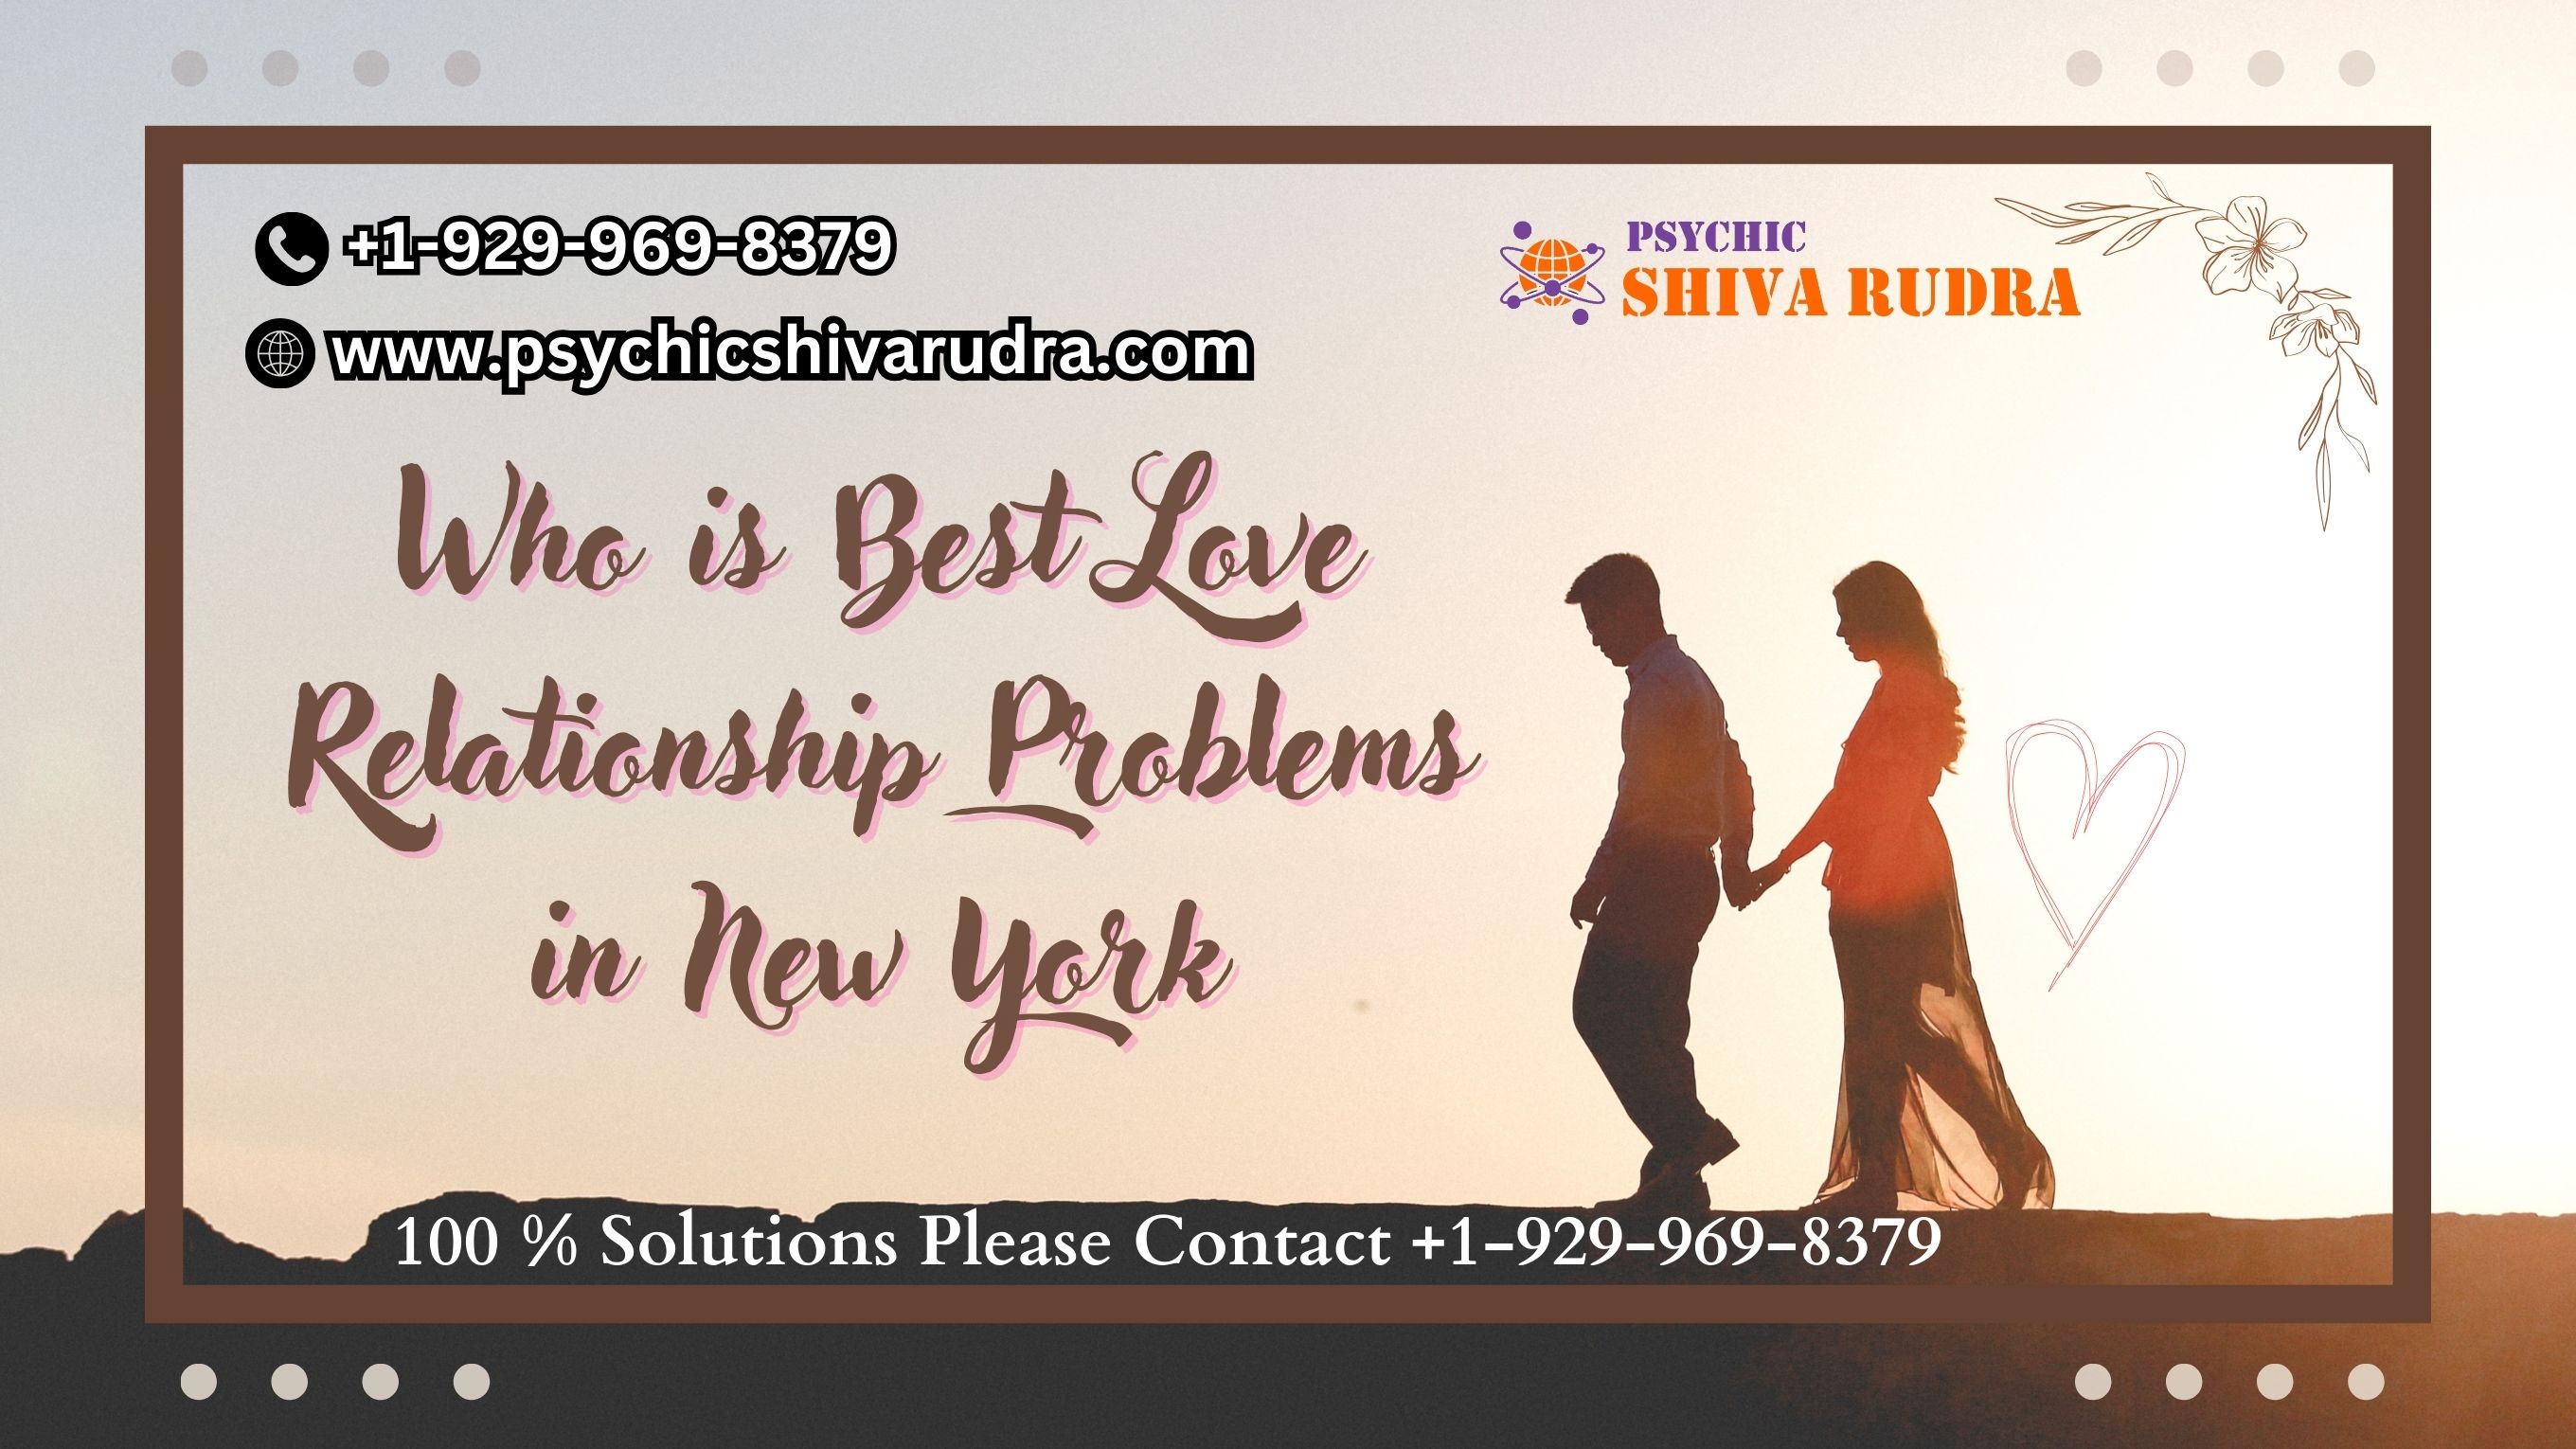 Who is Best Love Relationship Problems in New York